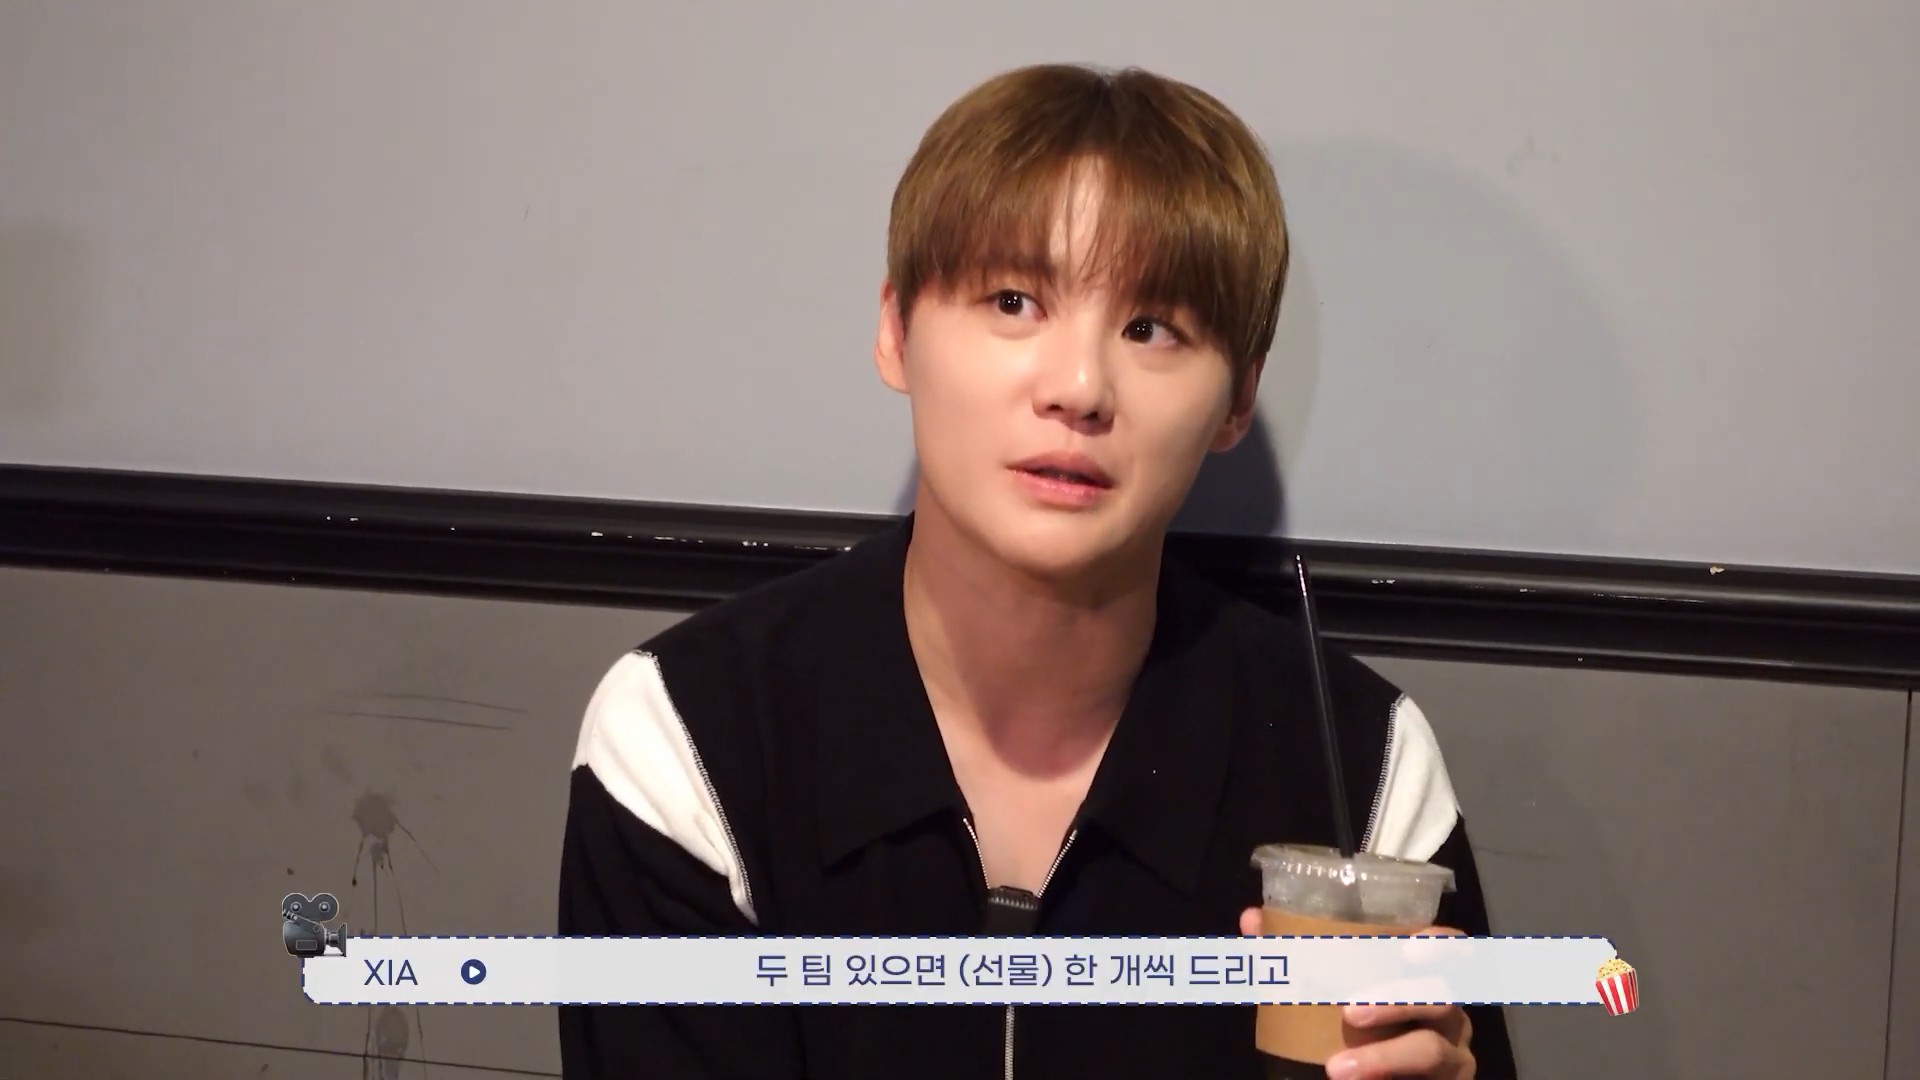 XIA l Behind the Scenes Concert Movie chapter 1 Stage greeting21.jpg